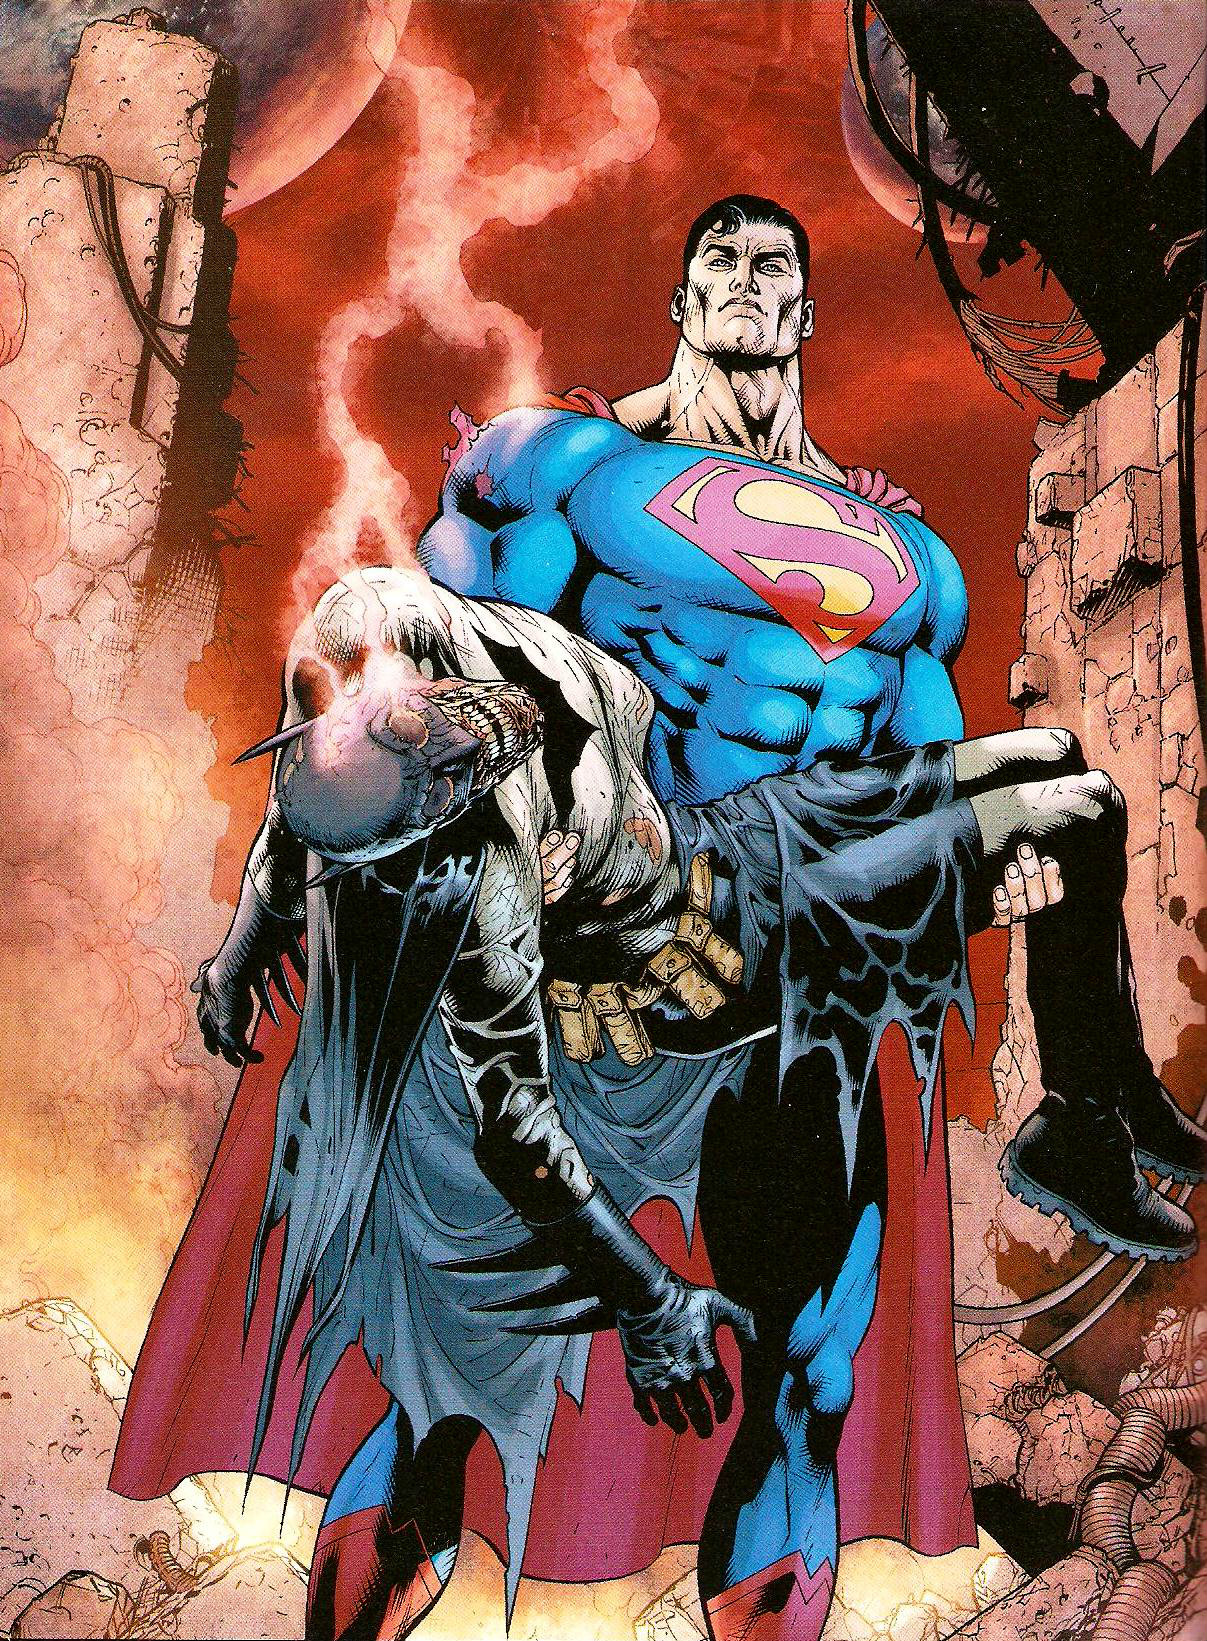 From Final Crisis #6 (2009)